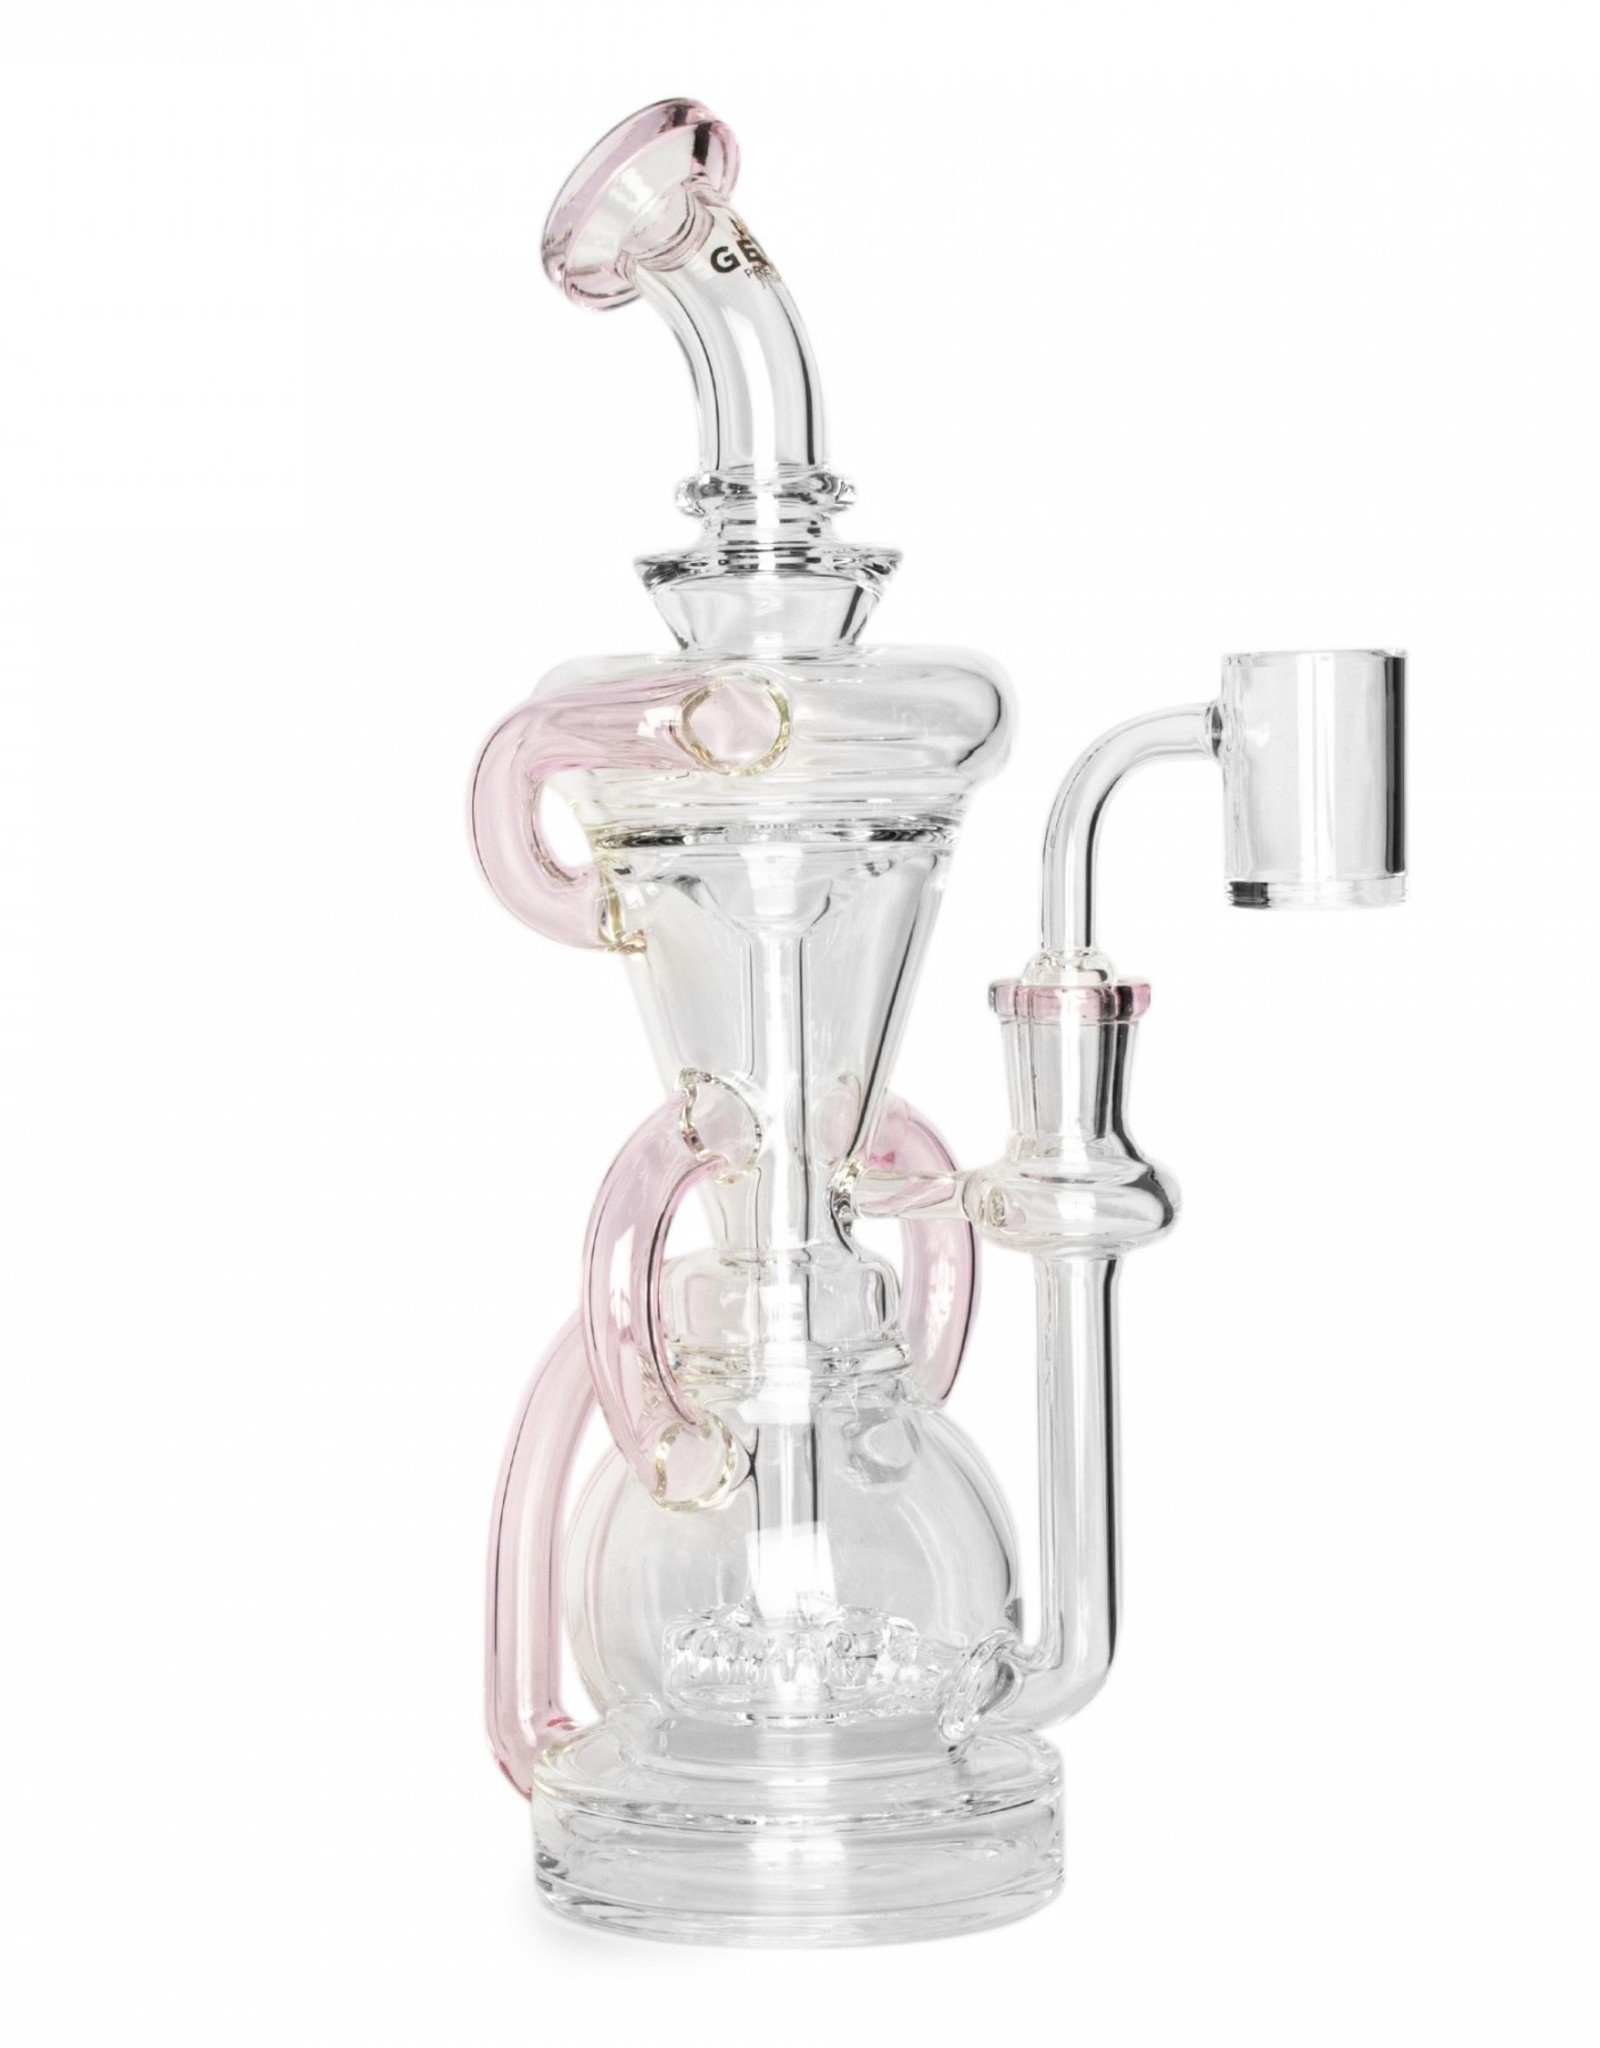 GEAR Premium 10" Crystal Glide Triple Uptake Dual Chamber Concentrate Recycler by GEAR Premium